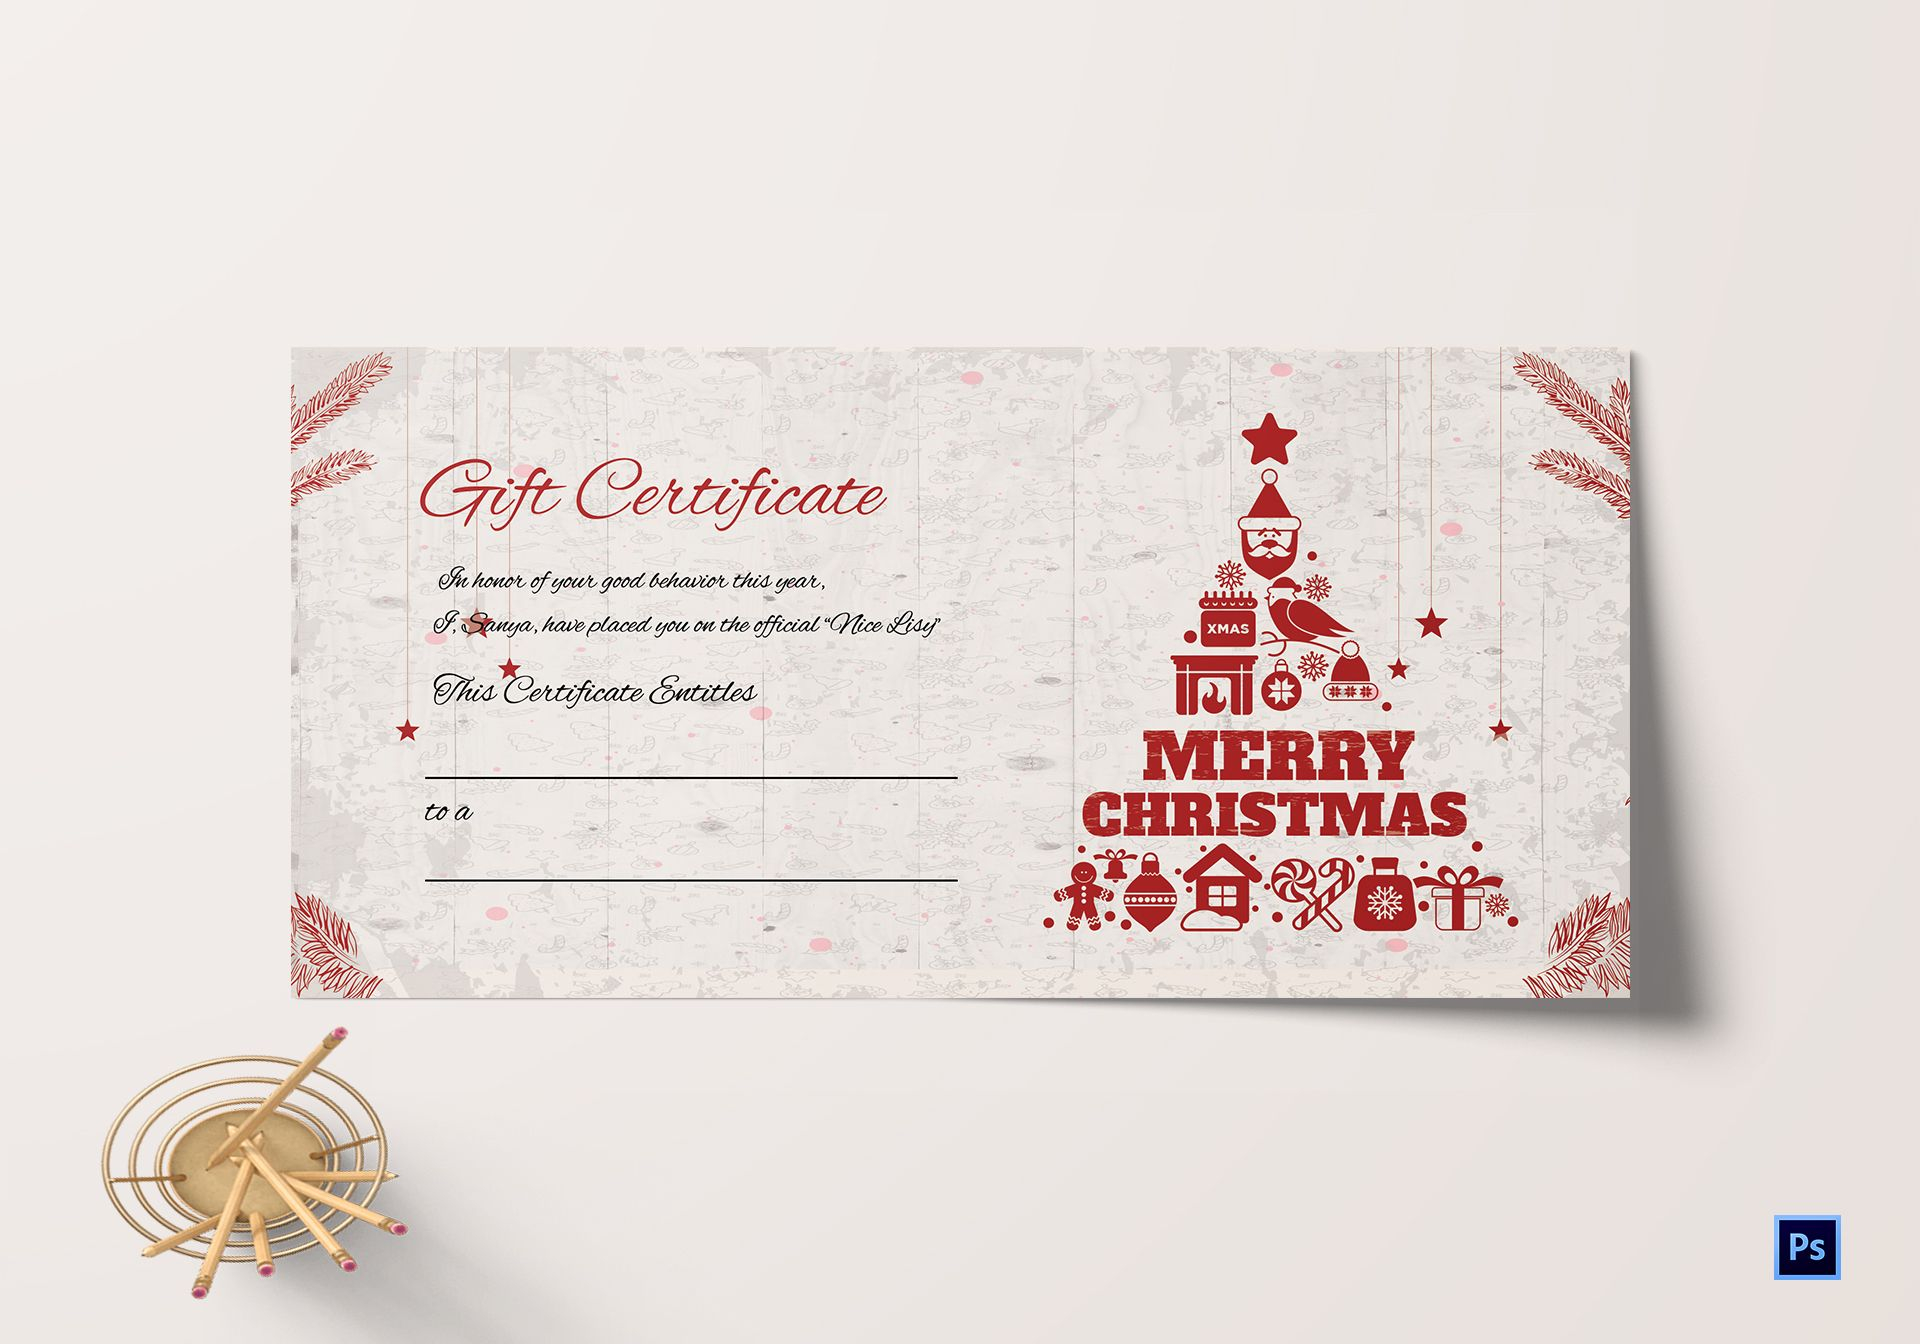 Merry Christmas Gift Certificate Template in Adobe Photoshop Within Merry Christmas Gift Certificate Templates